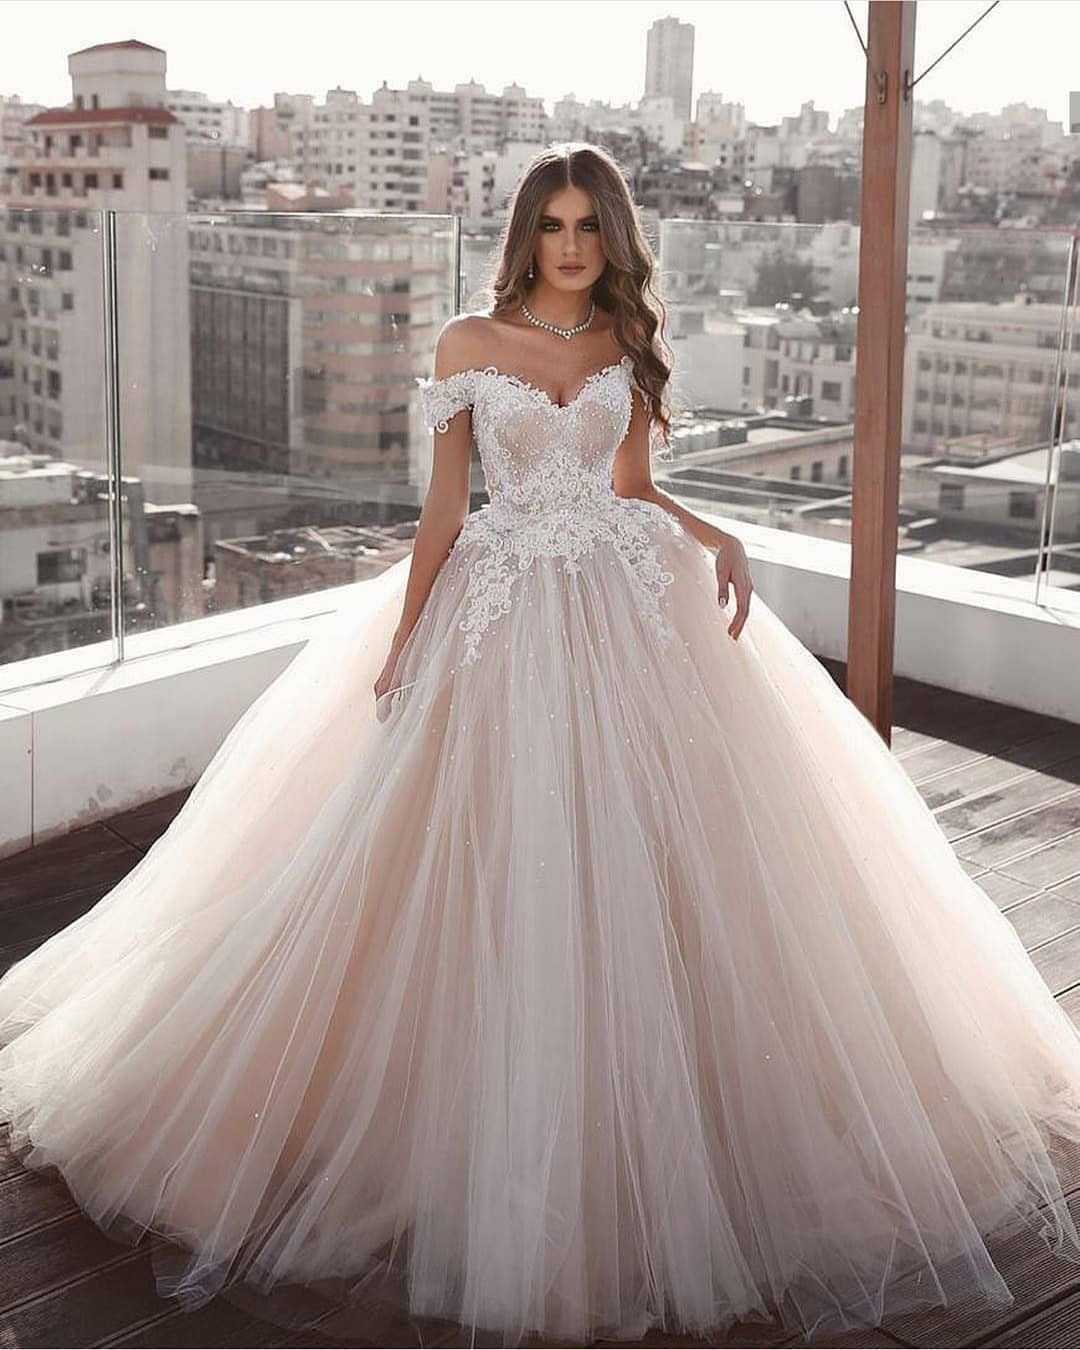 ball gown wedding dresses sweetheart neckline strapless said mhamad